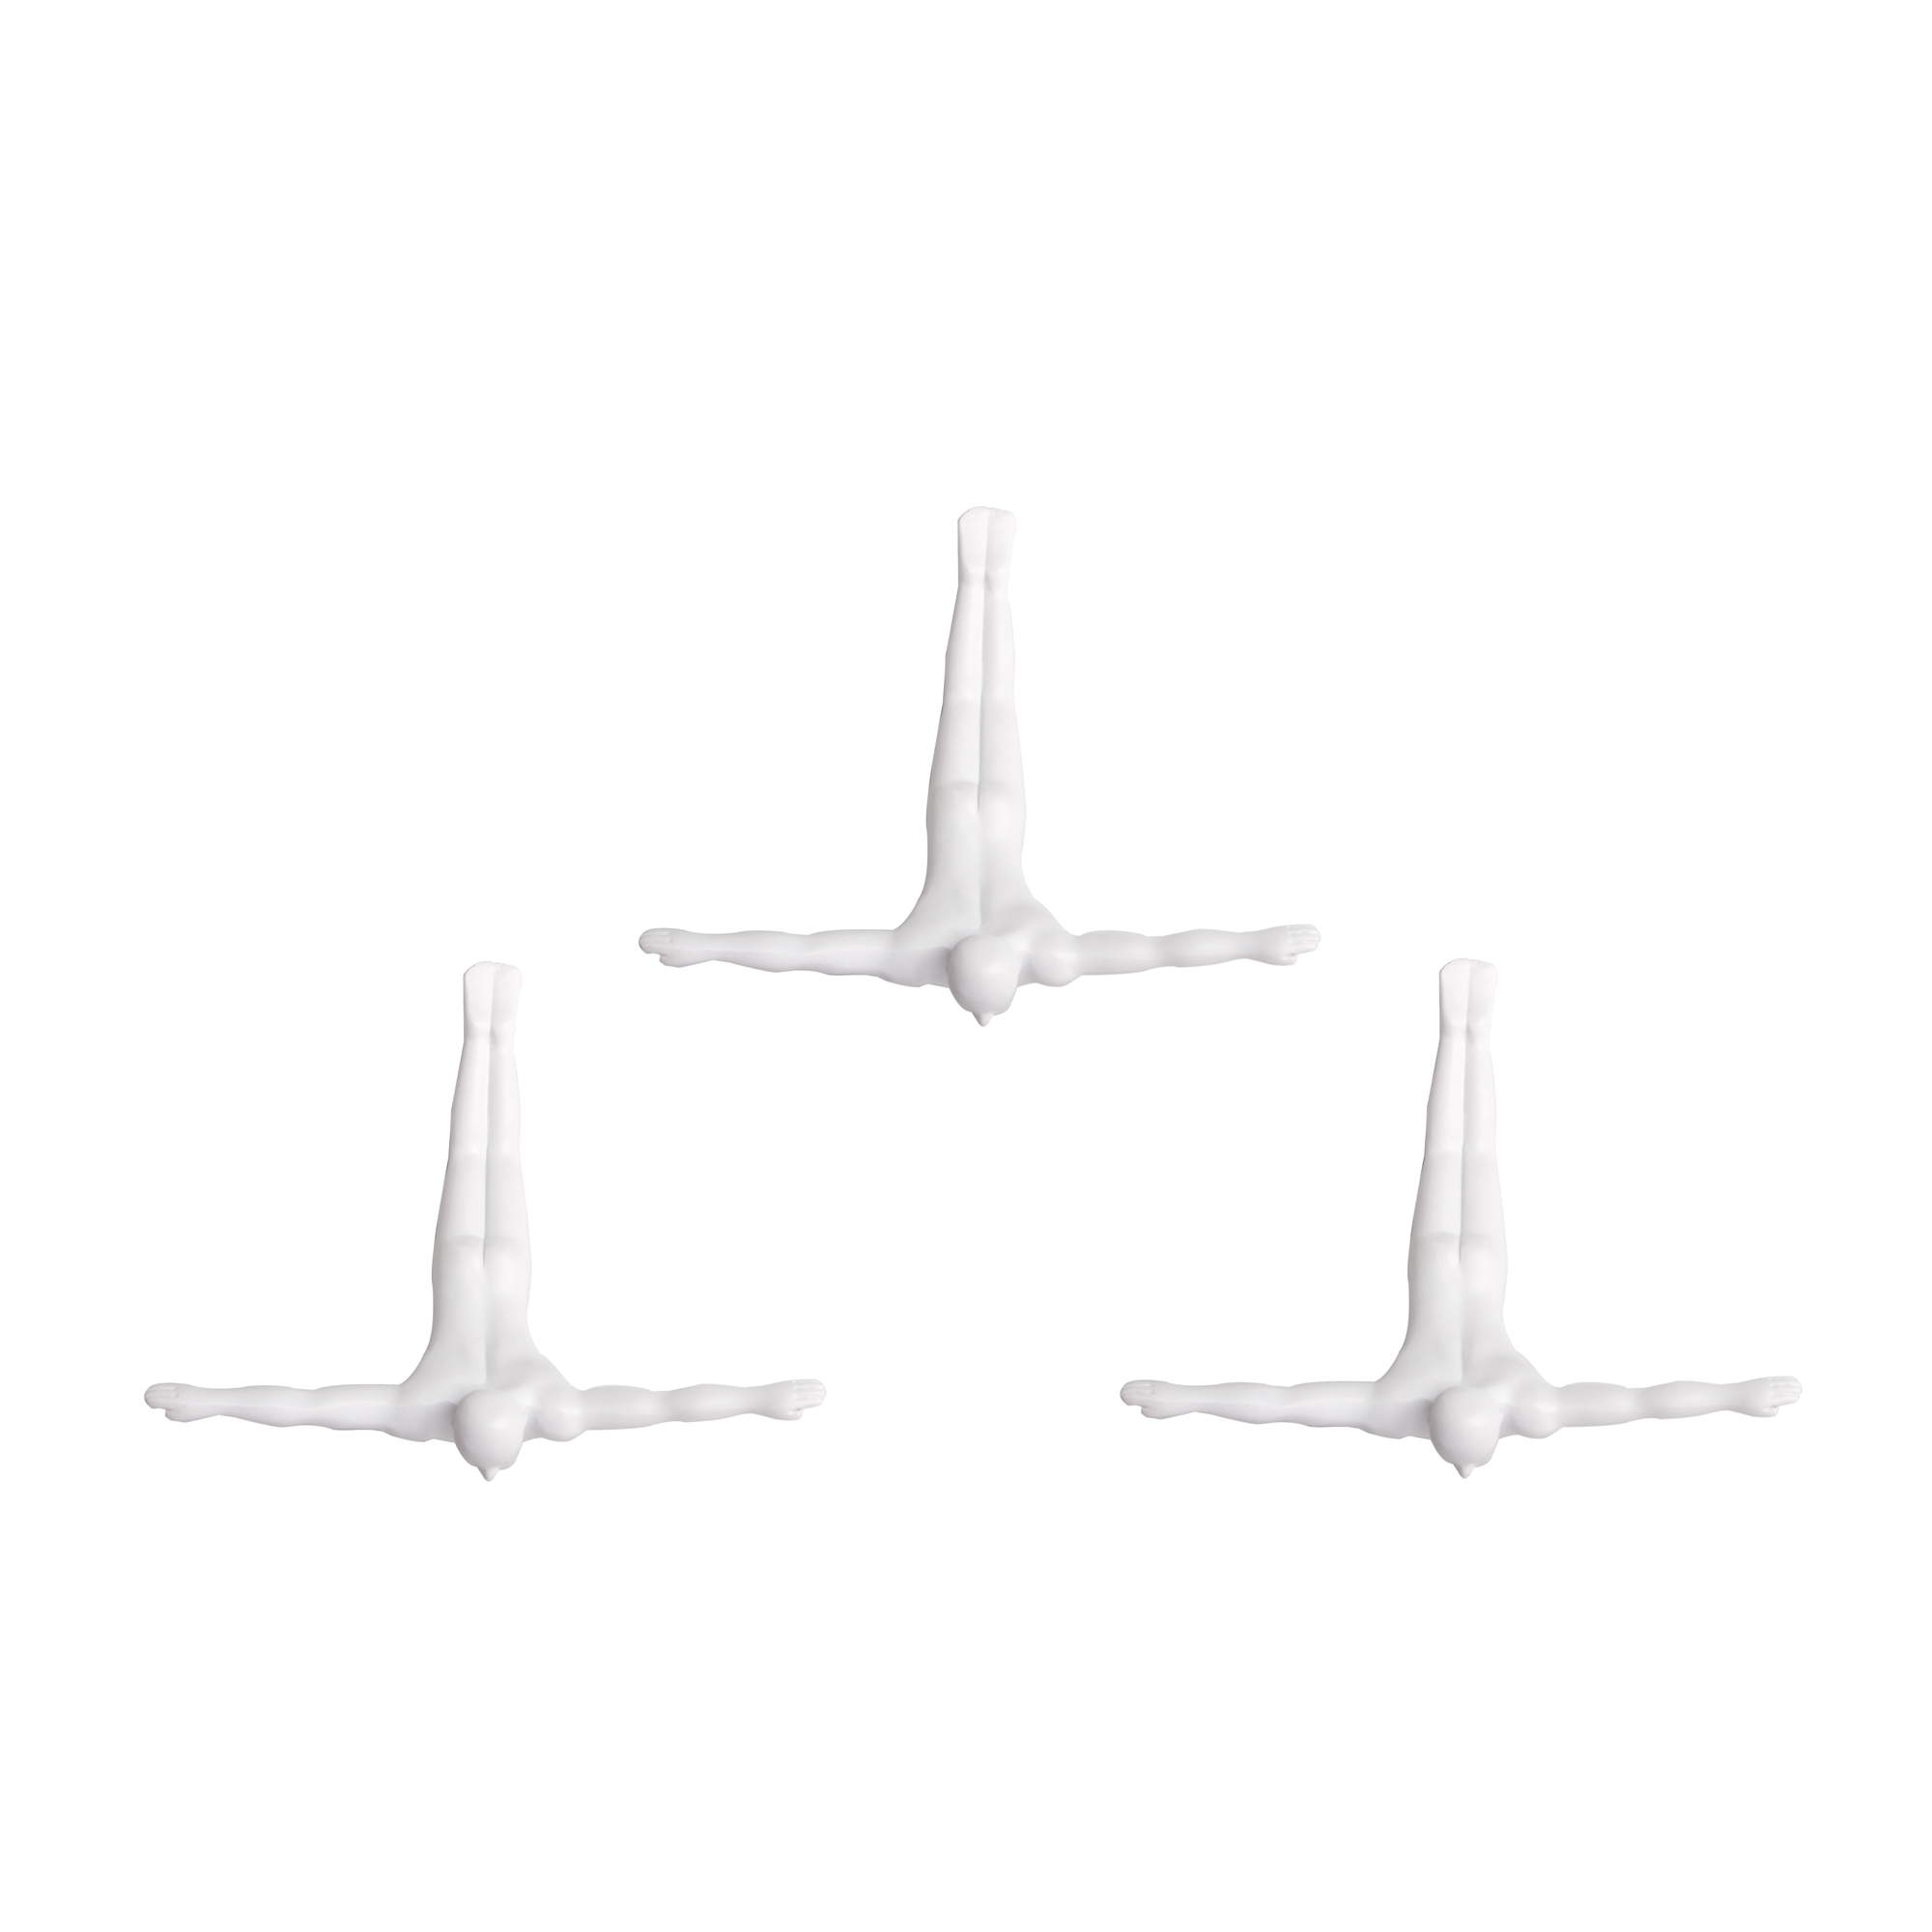 6.5" x 2.5" x 6.5" Wall Diver - White 3-Pack